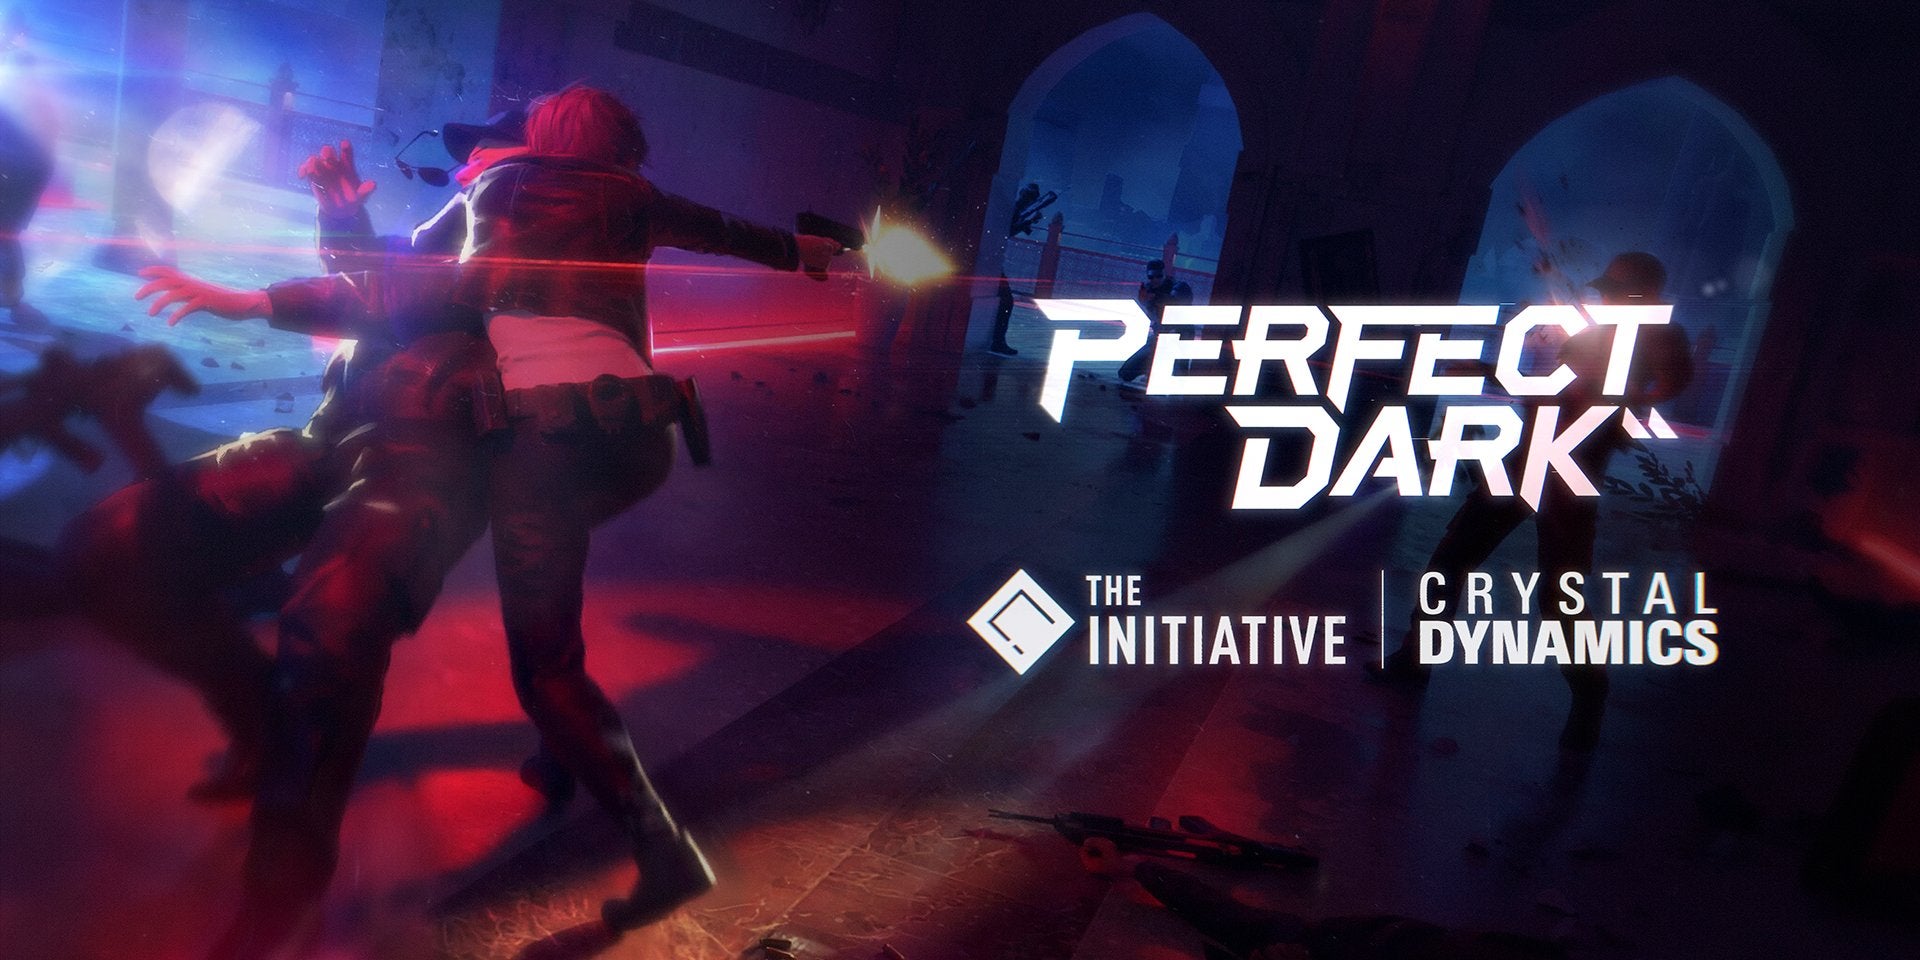 Image for Microsoft's The Initiative partners with Square Enix's Crystal Dynamics for Perfect Dark reboot